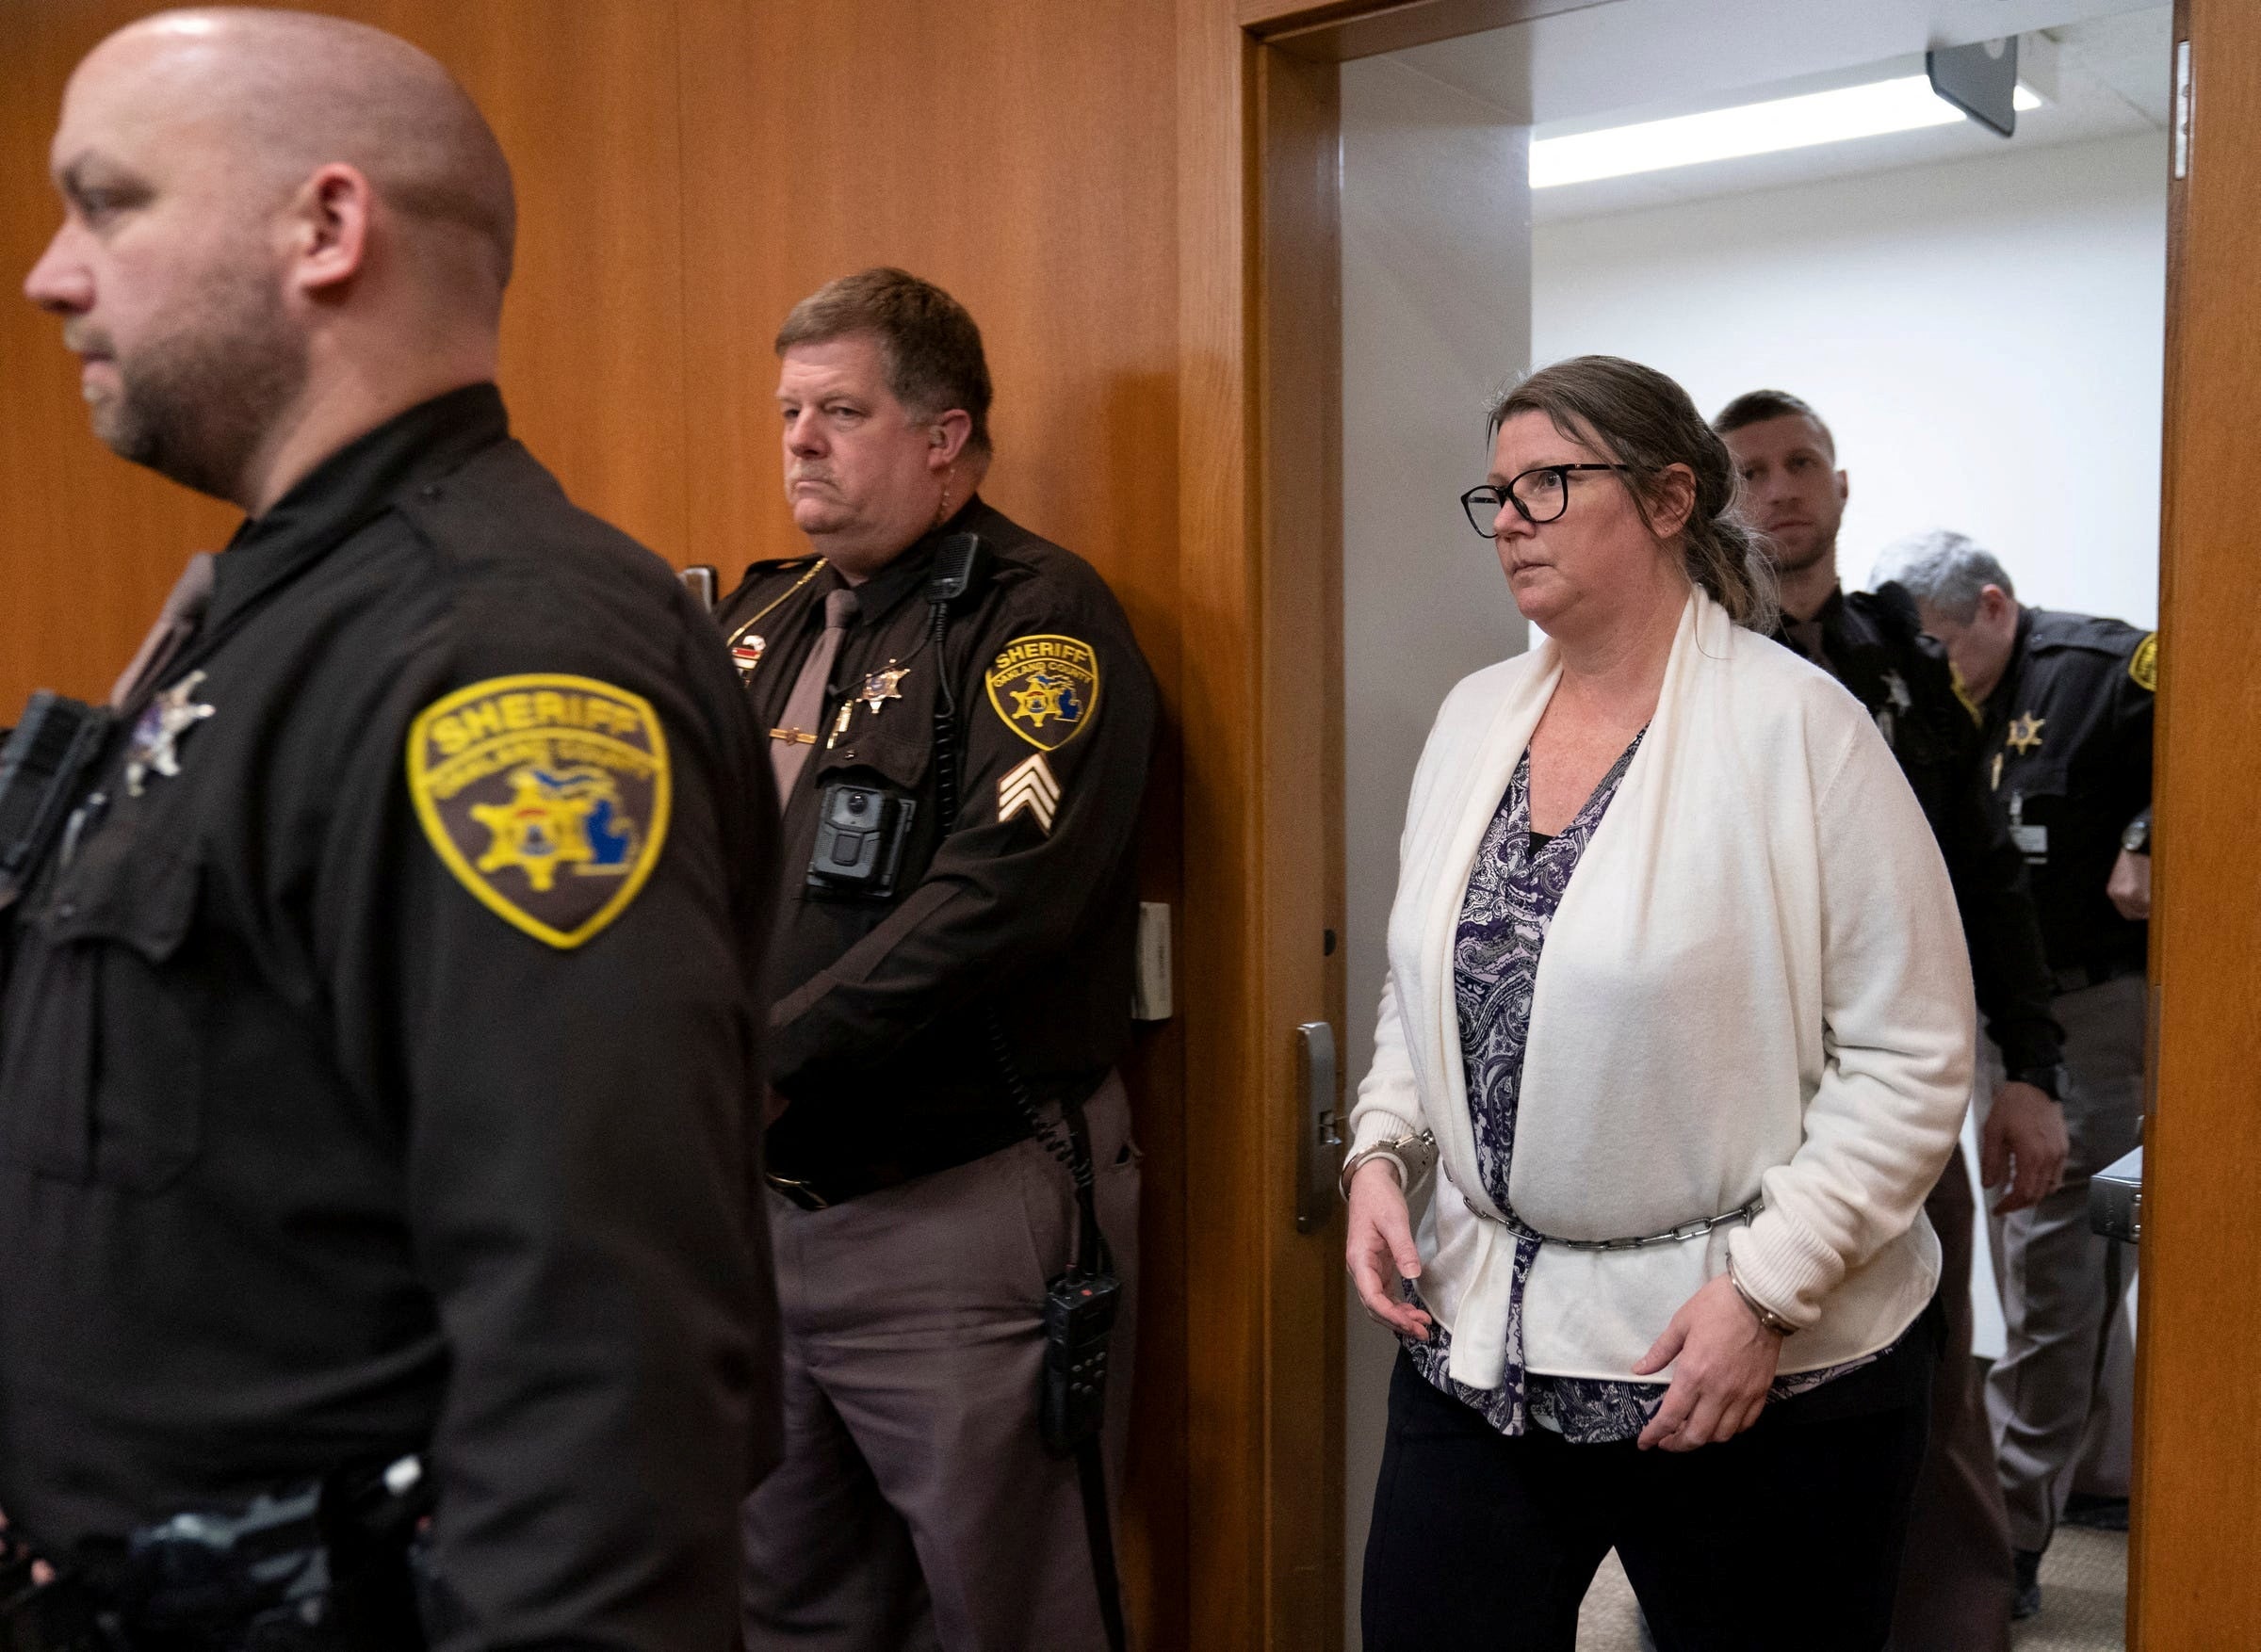 Jennifer Crumbley, the mother of Oxford High School shooter Ethan Crumbley, enters the court to hear the verdict just before the jury found her guilty on four counts of involuntary manslaughter on at Oakland County Circuit Court in Pontiac, Michigan, U.S. February 6, 2024